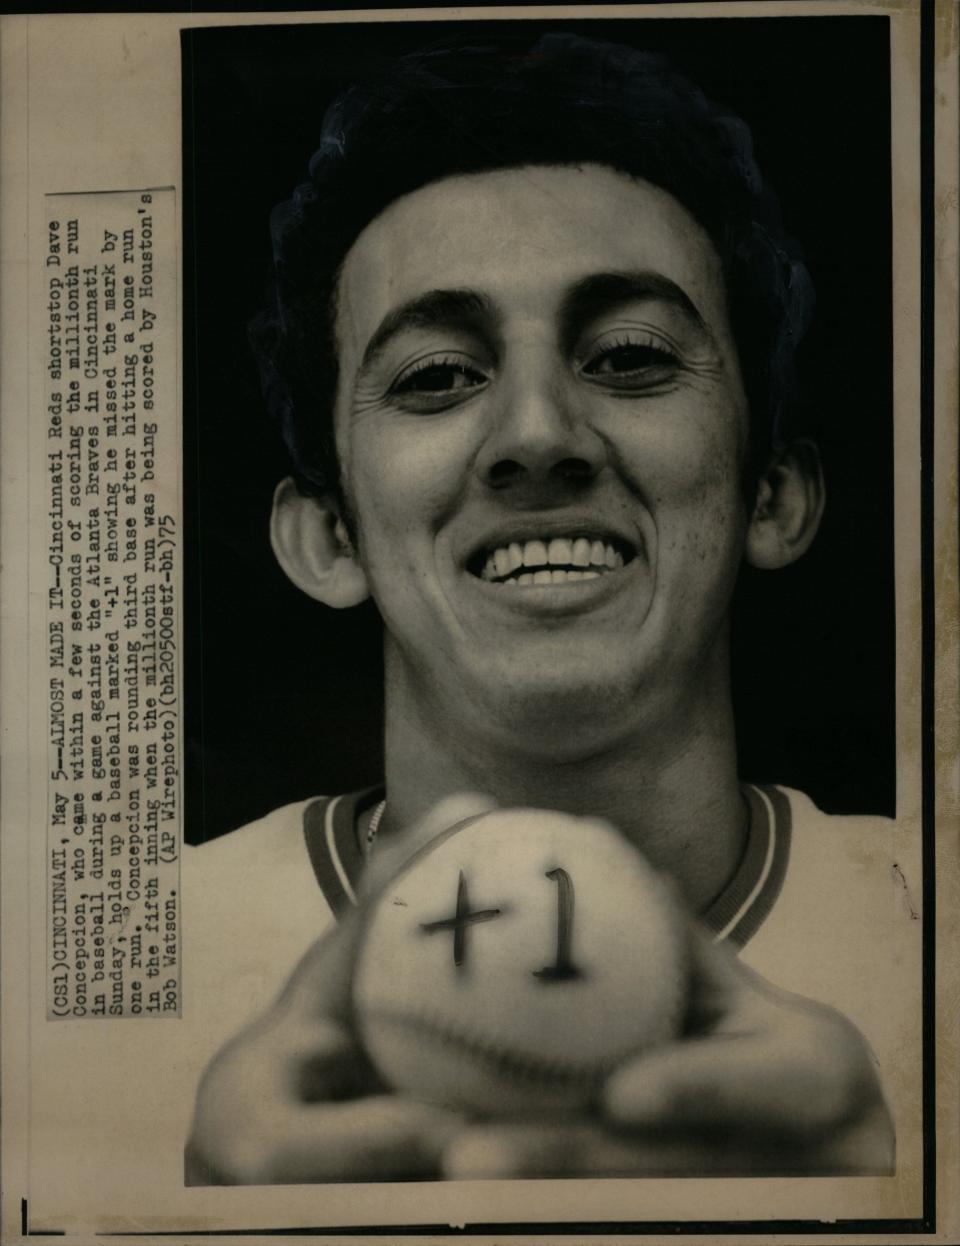 Cincinnati Reds shortstop Dave Concepcion, who came within a few seconds of scoring the millionth run in baseball during a game against the Atlanta Braves, holds up a baseball marked "+1" showing he missed the mark by one run.